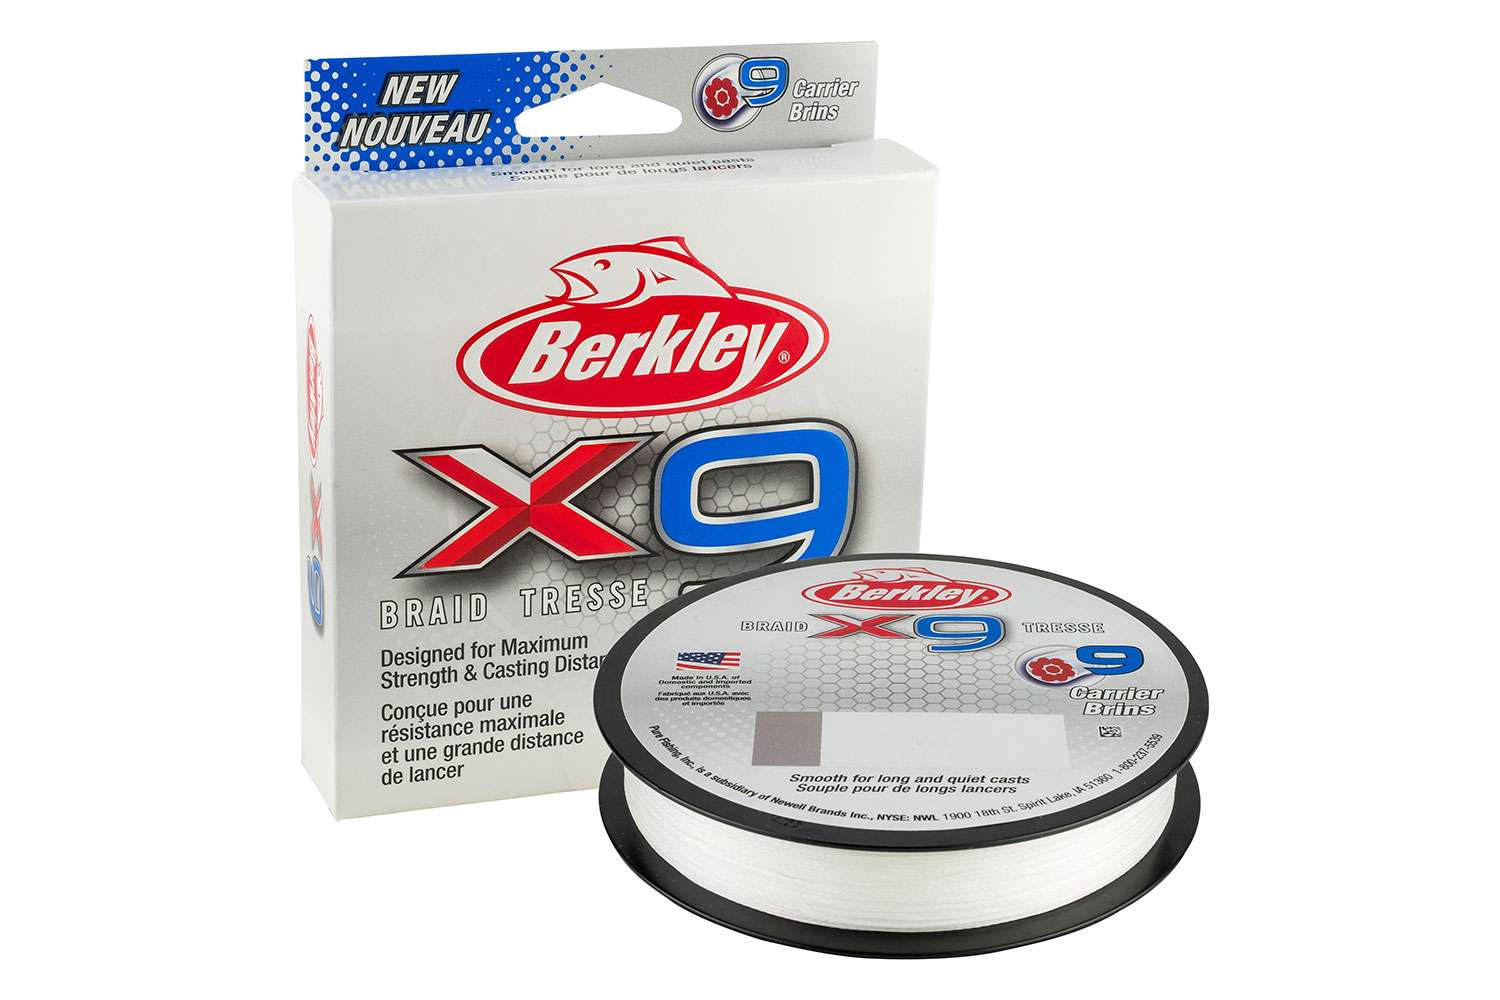 <p><b>Berkley x9 Braid, $13.99-$199.99</b></p> The new Berkley x9 braided line take strength and reliability to the next level by adding another strand, respectively, all while keeping the same diameter as traditional four- and eight-carrier braids. Designed for maximum strength and abrasion resistance, Berkley x9 braided line is designed for maximum strength and casting distance so anglers can make long, quiet casts in open water <br> <a href=